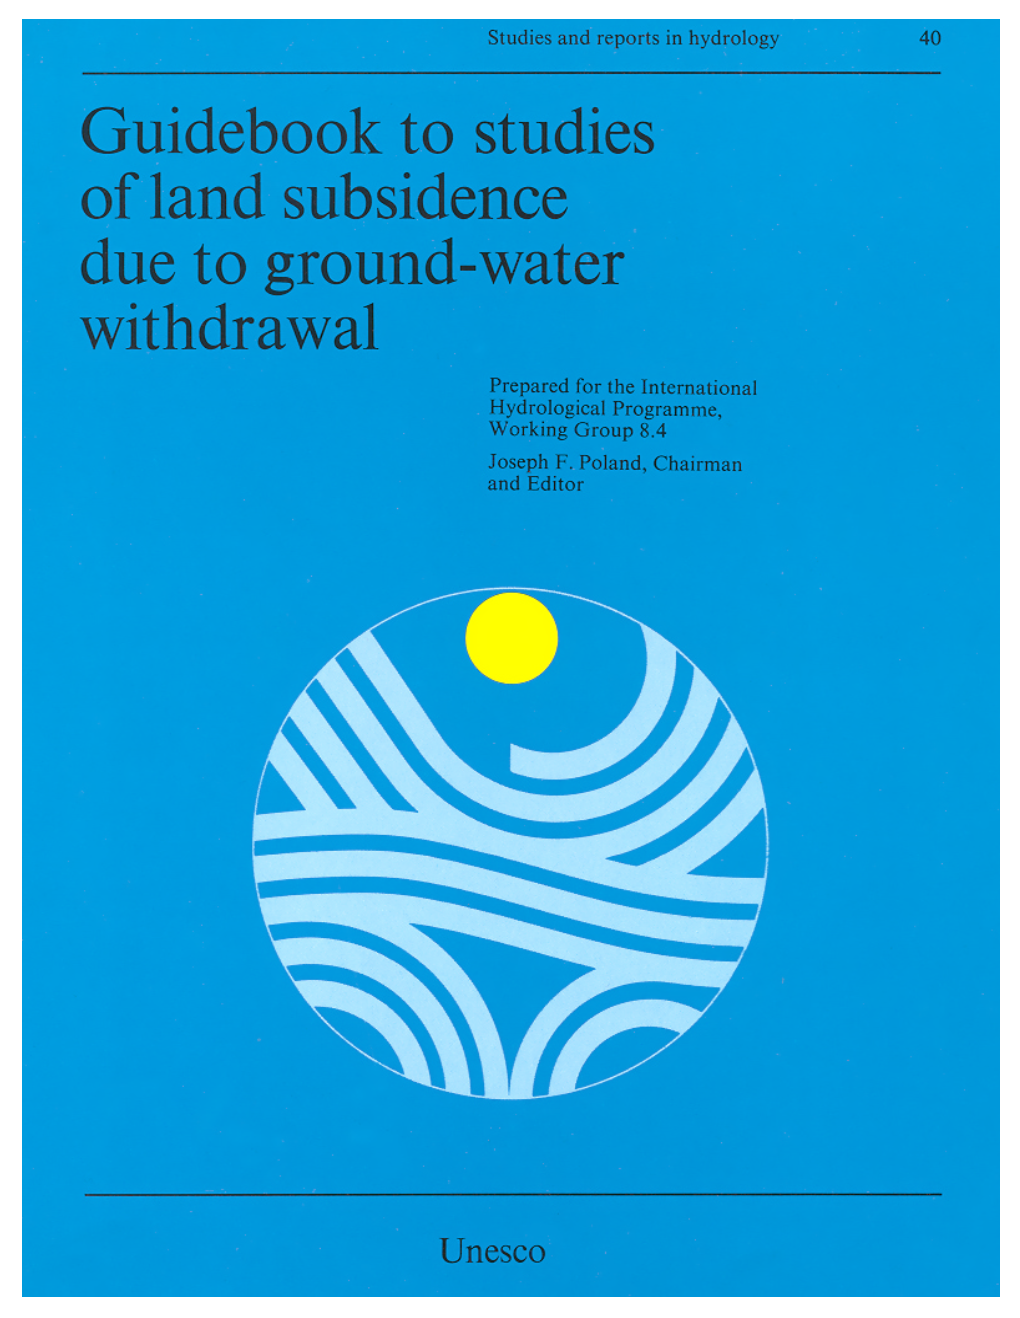 Guidebook to Studies of Land Subsidence Due to Ground-Water Withdrawal